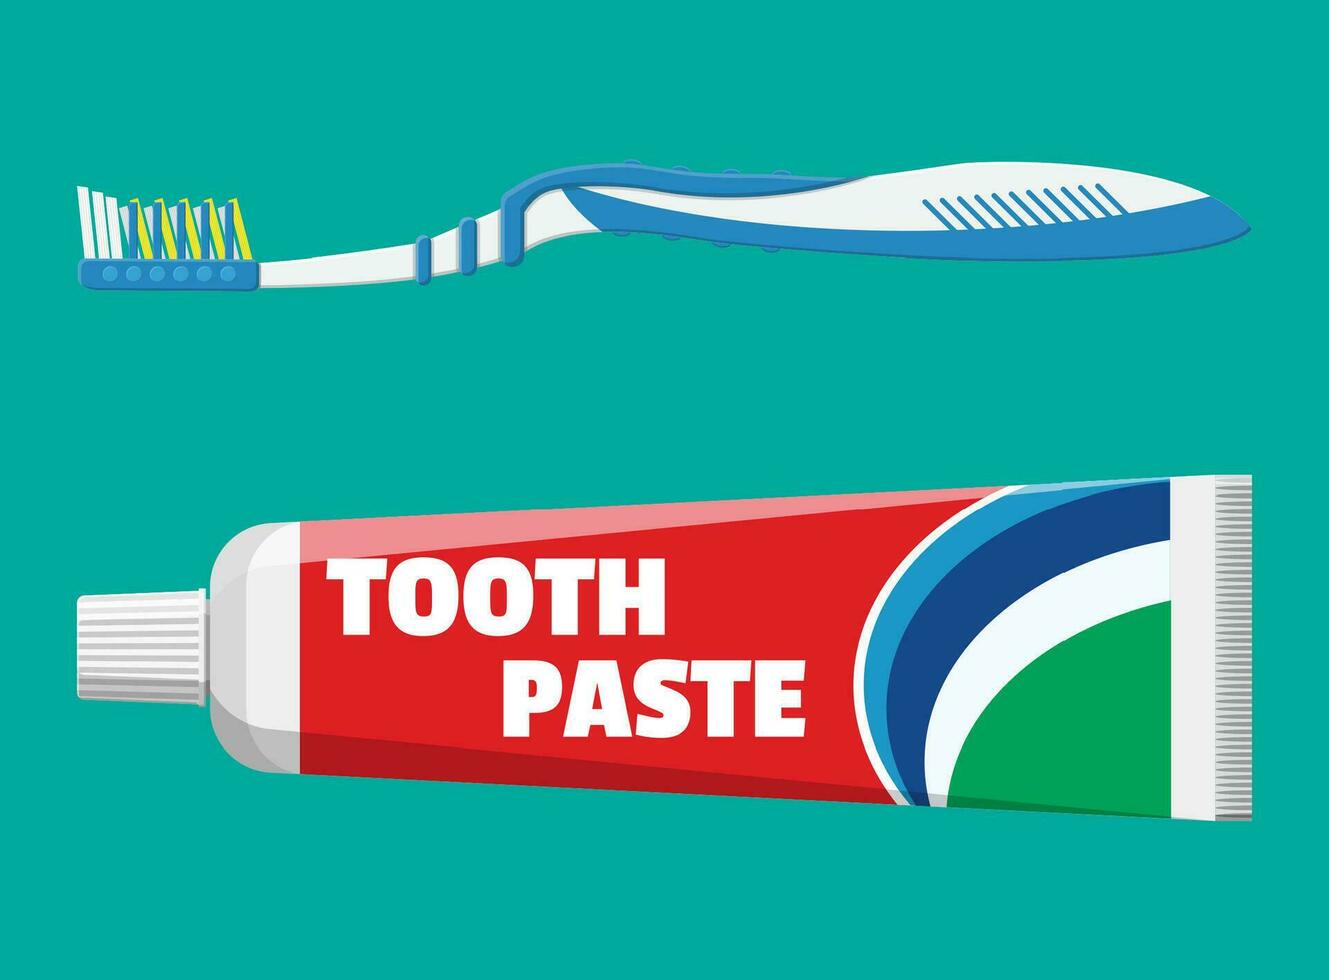 Toothbrush, toothpaste in tube. Brushing teeth. Dental equipment. Hygiene and oralcare. Vector illustration in flat style